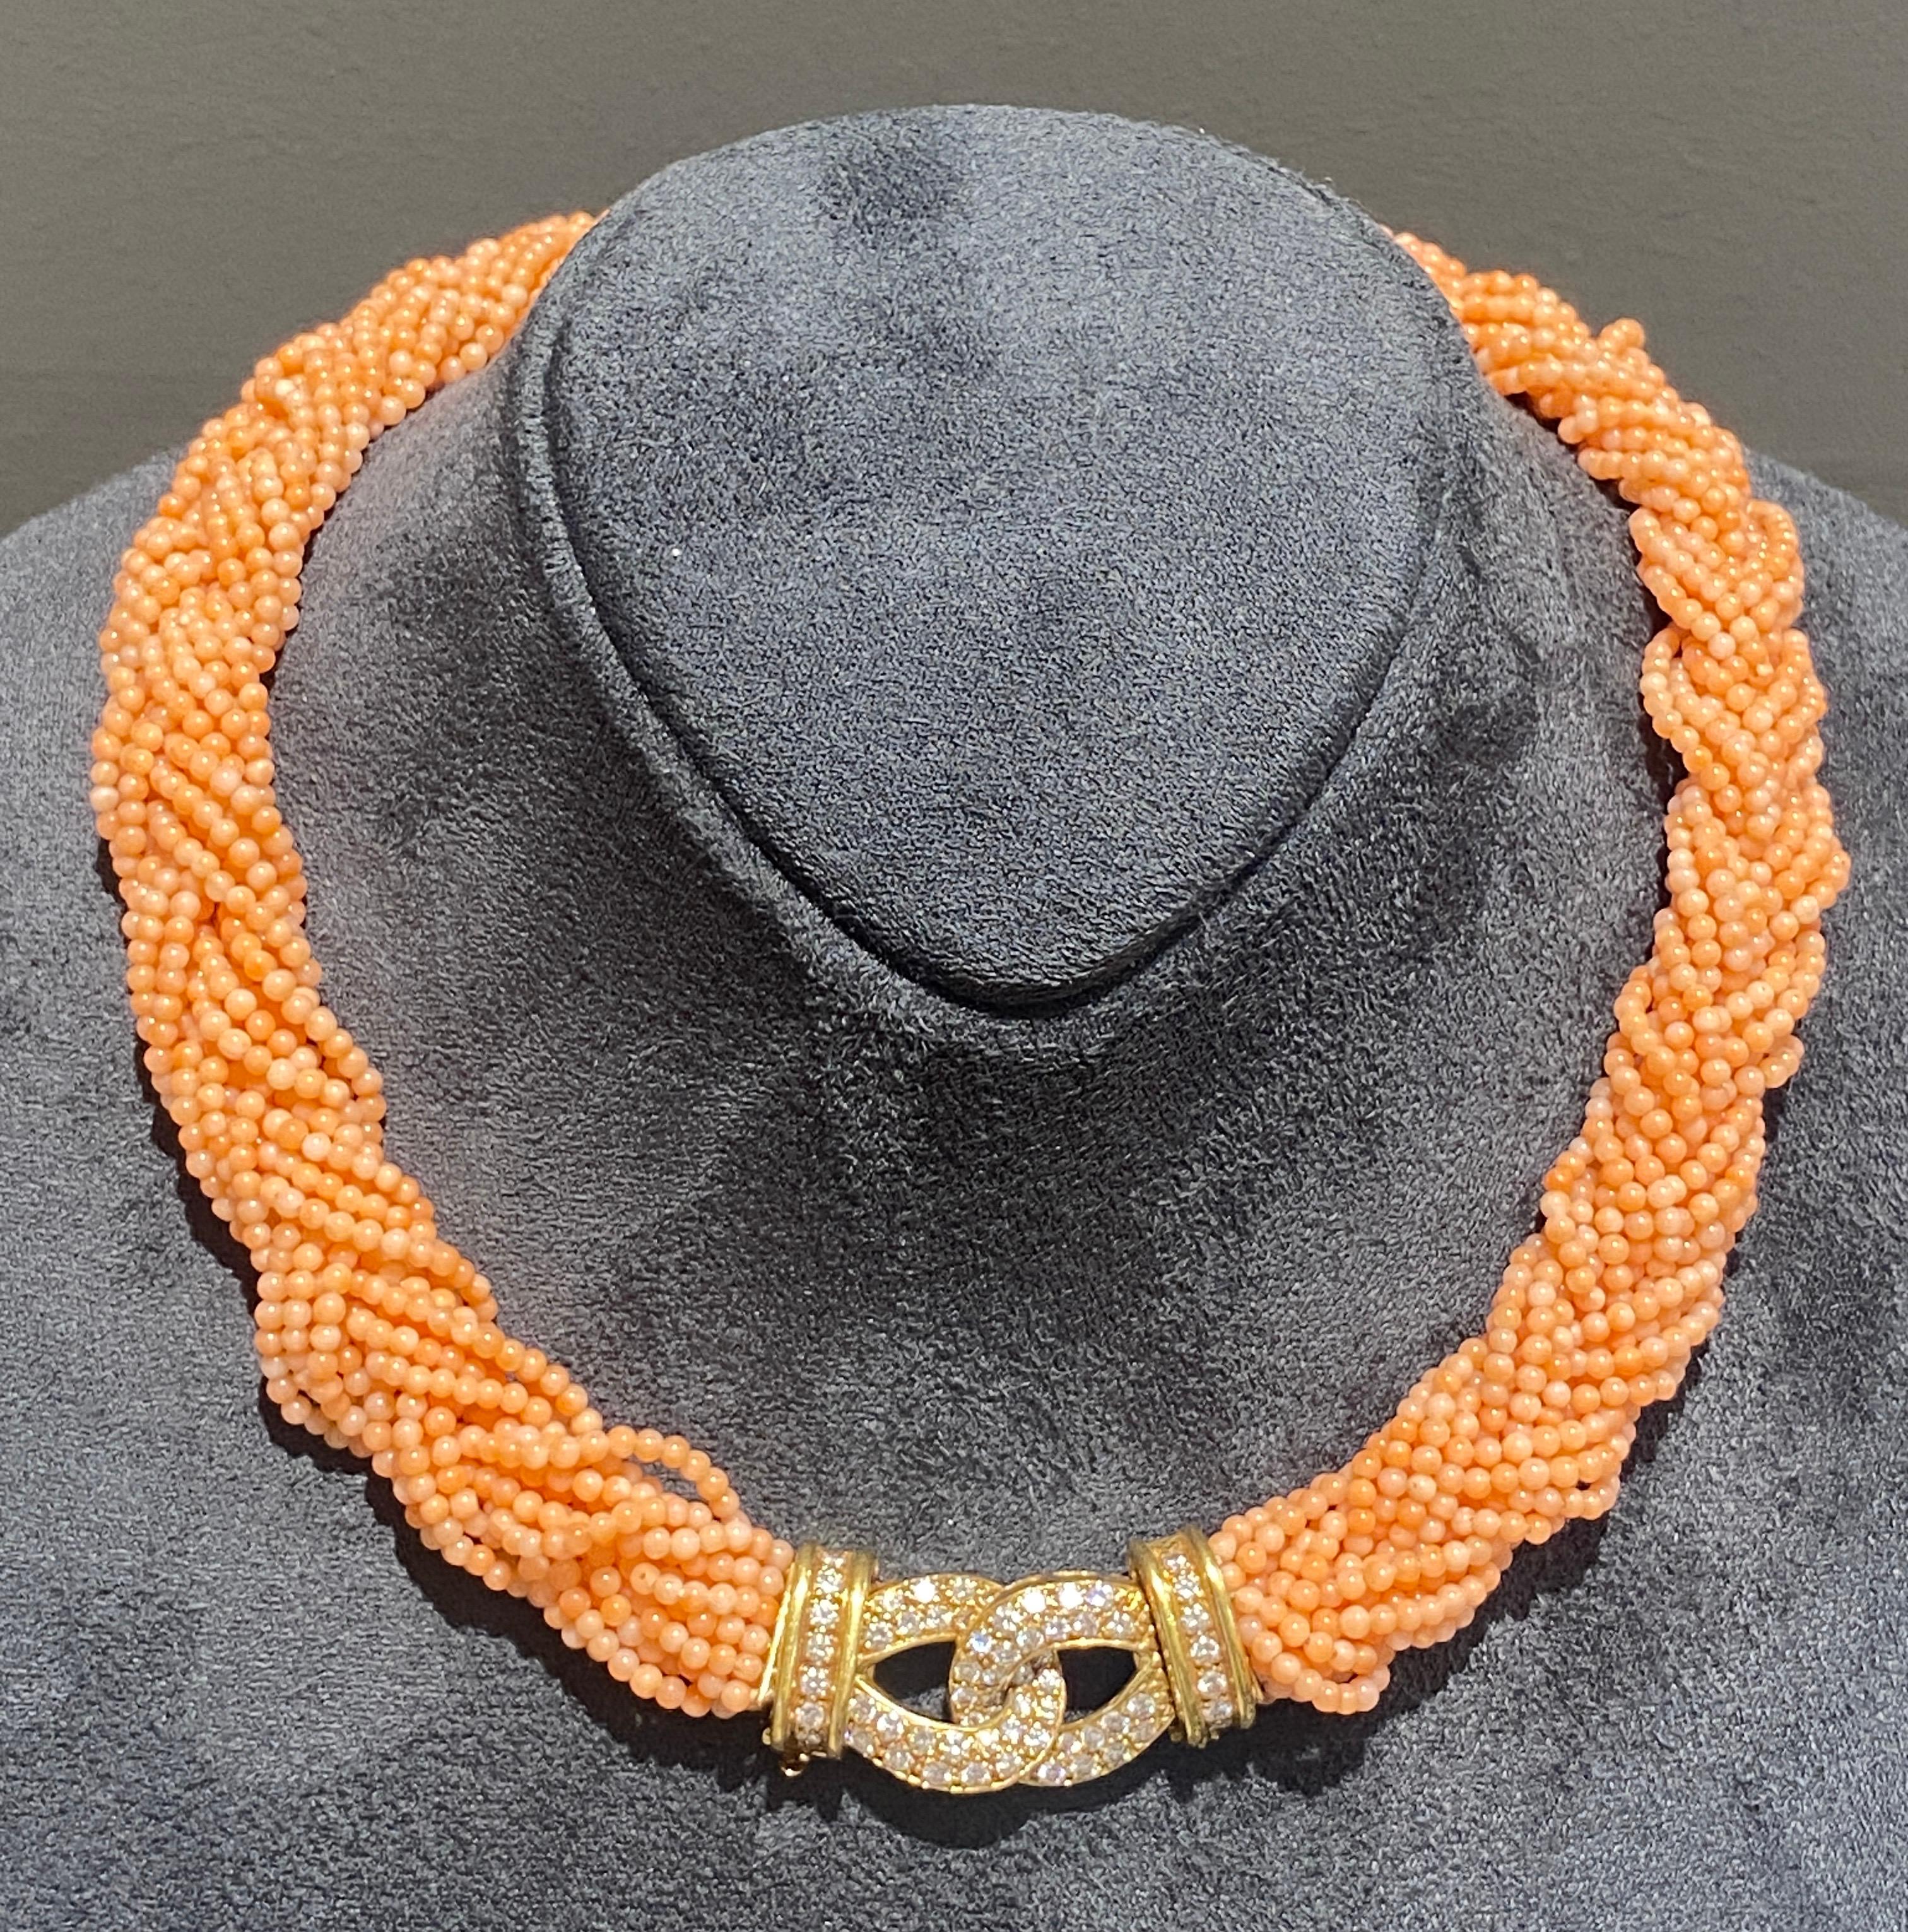 This striking 1980s Van Cleef & Arpels coral and diamond necklace is beautifully made with a detachable 18 carat gold and diamond clasp that connects the plaited strands of coral. The ends of the coral strands are marked with VCA as is the 18 carat